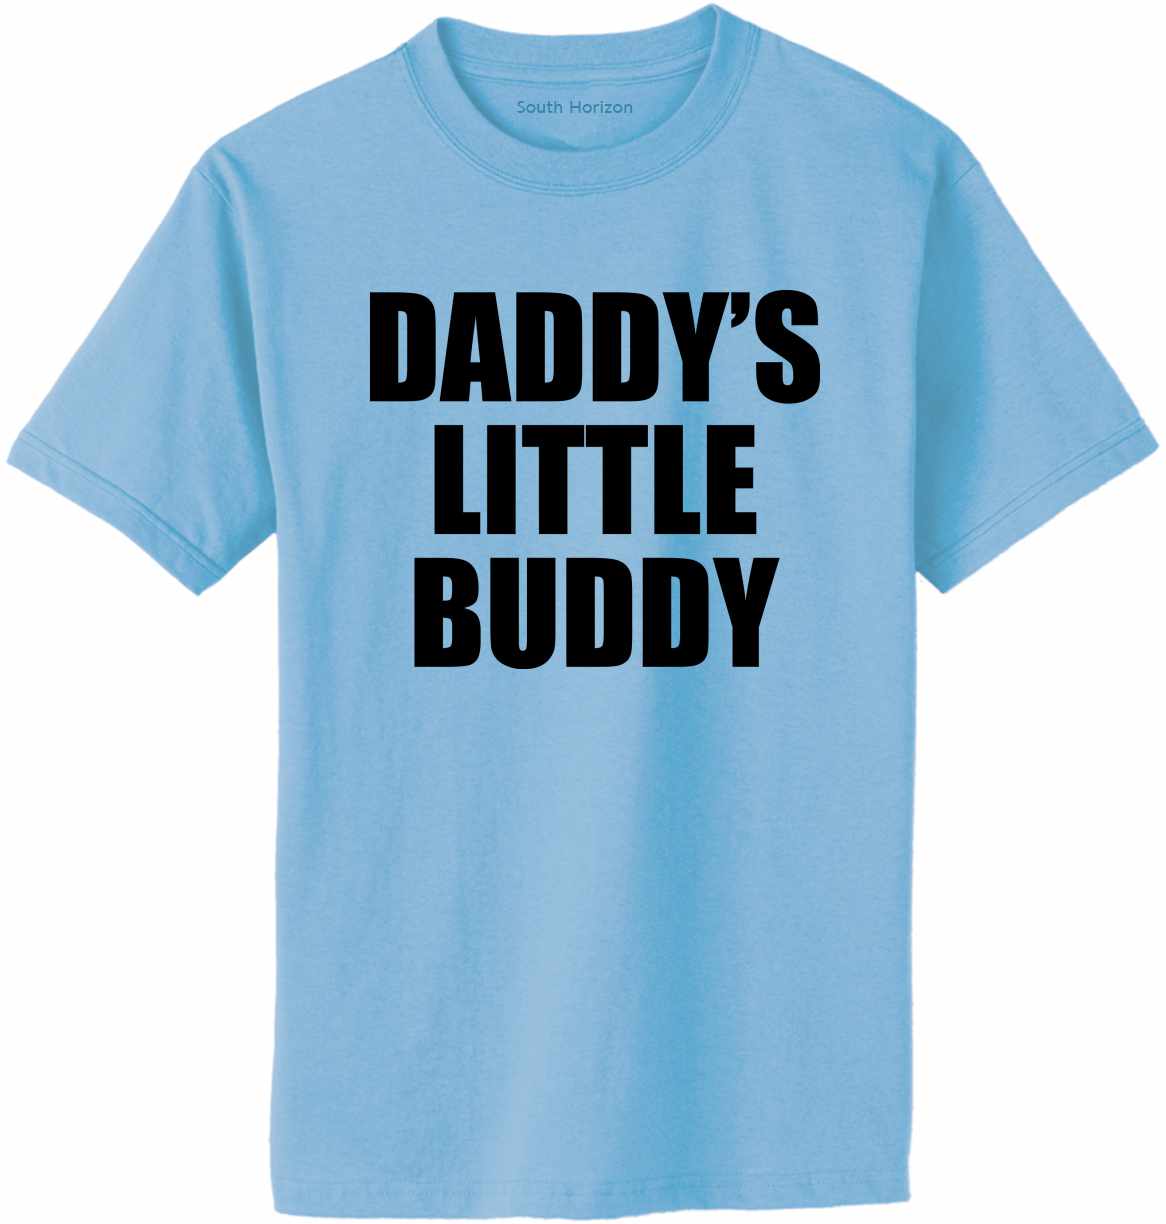 Daddy's Little Buddy on Adult T-Shirt